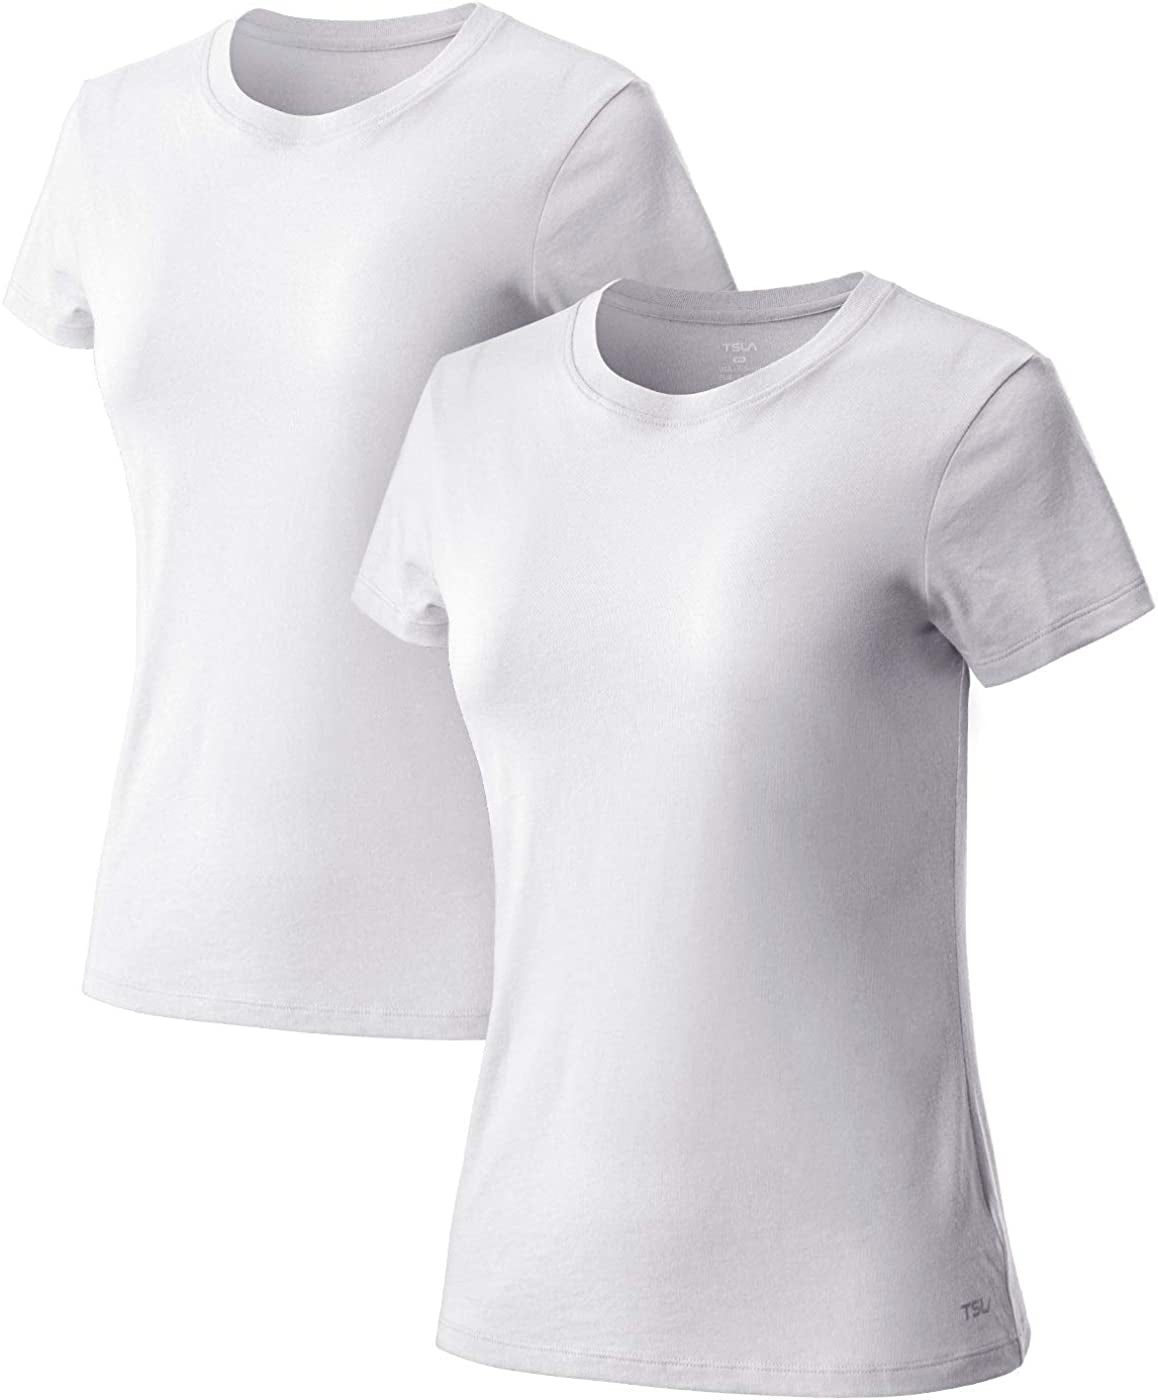  2 Pack Women's Workout Shirts, Dry Fit Wicking Short Sleeve Shirts, Active Sports Running Exercise Gym Tee Shirt